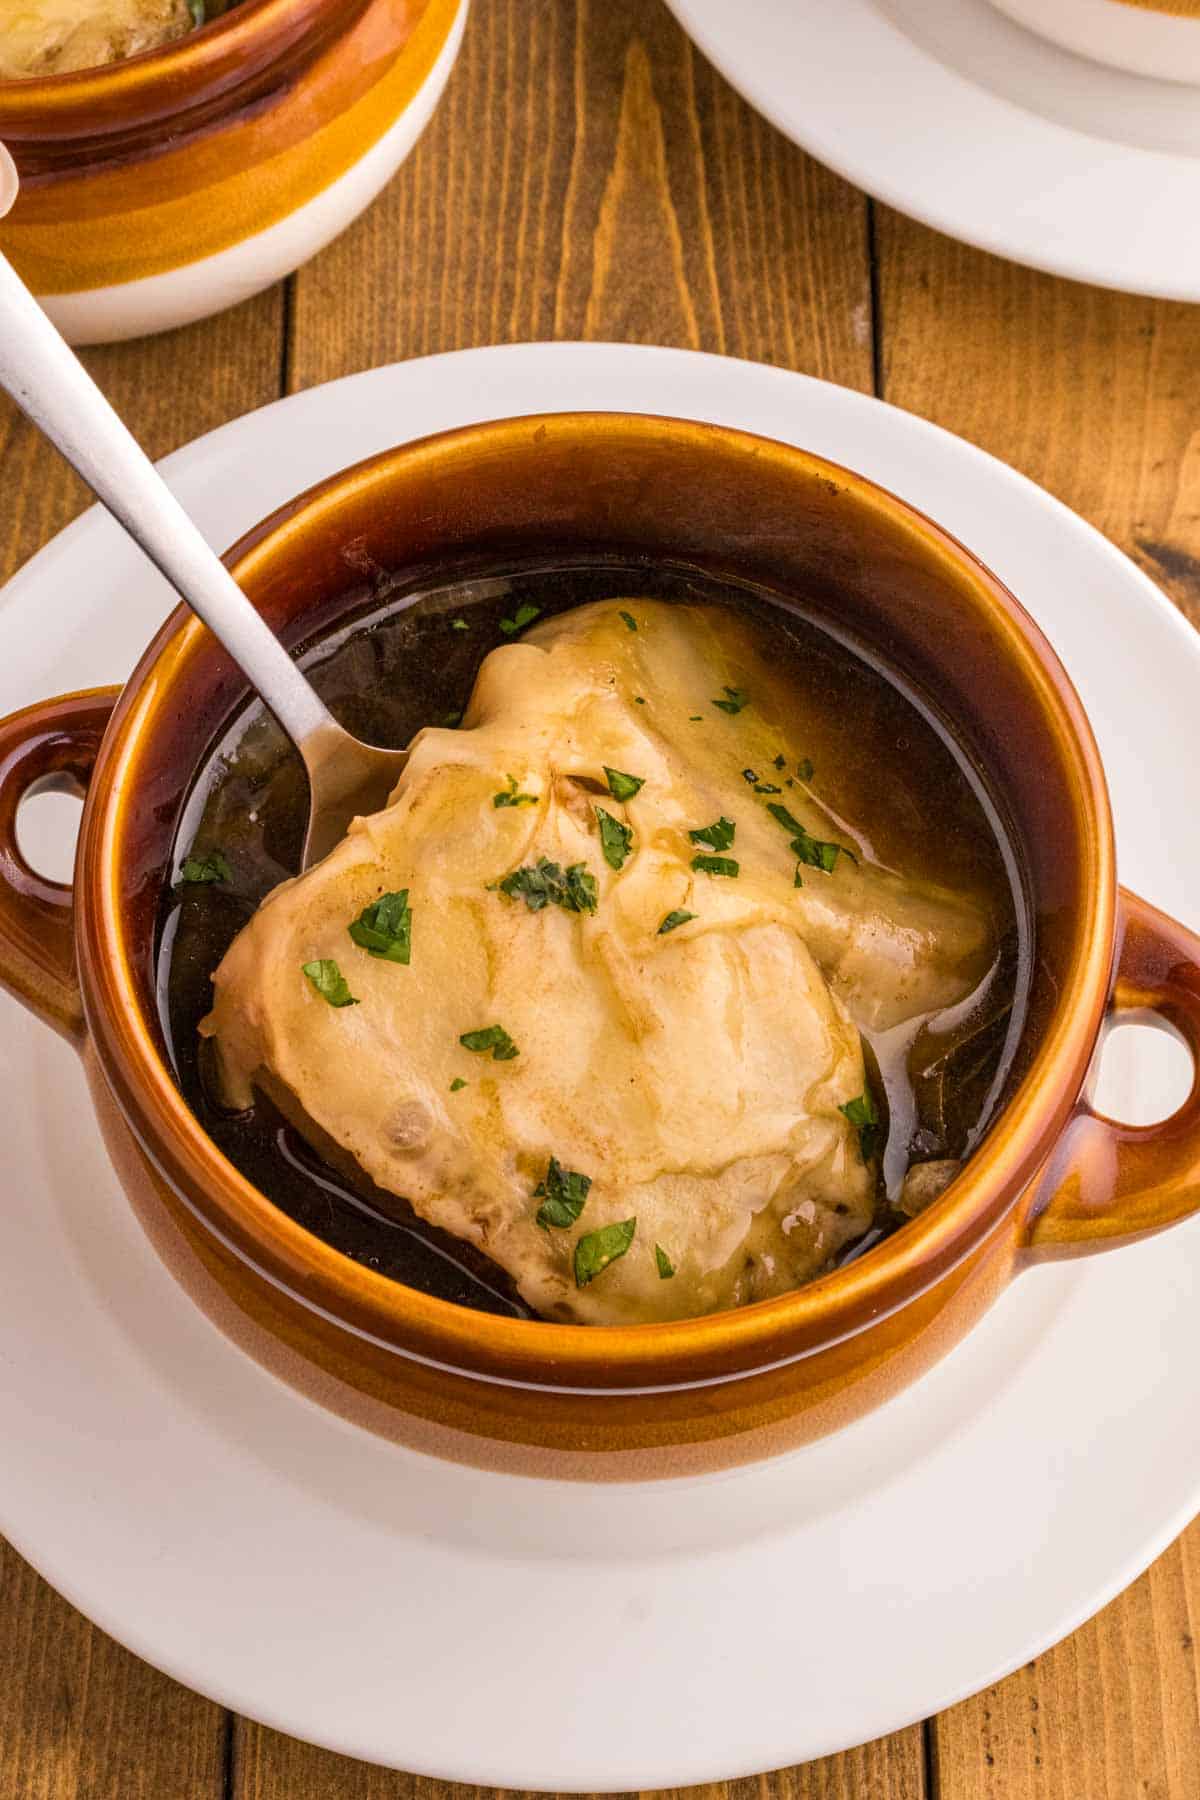 Easy French Onion Soup is a delicious soup with a beef broth base loaded with caramelized onions and topped with baked slices of French baguette and melted Gruyere or Swiss cheese.